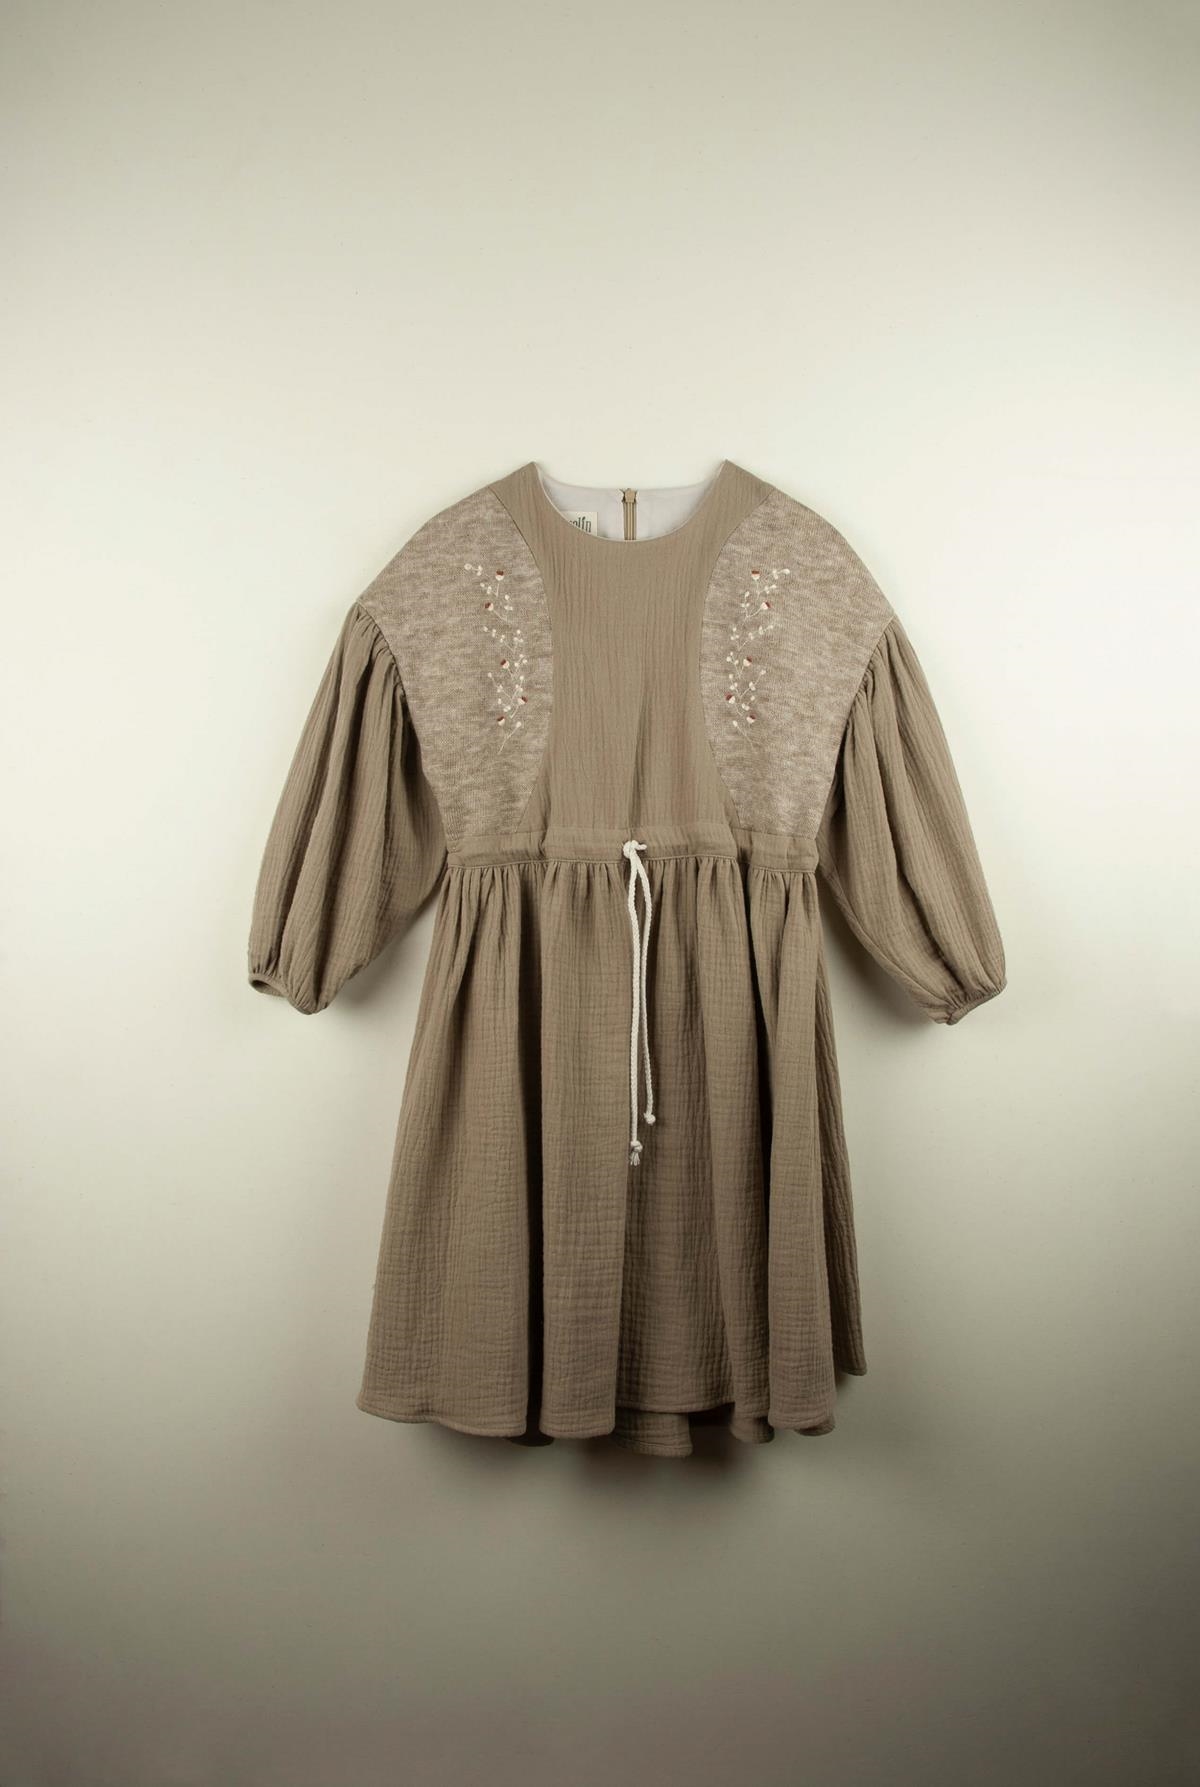 Mod.32.1 Taupe dress with embroidered sides | AW21.22 Mod.32.1 Taupe dress with embroidered sides | 1